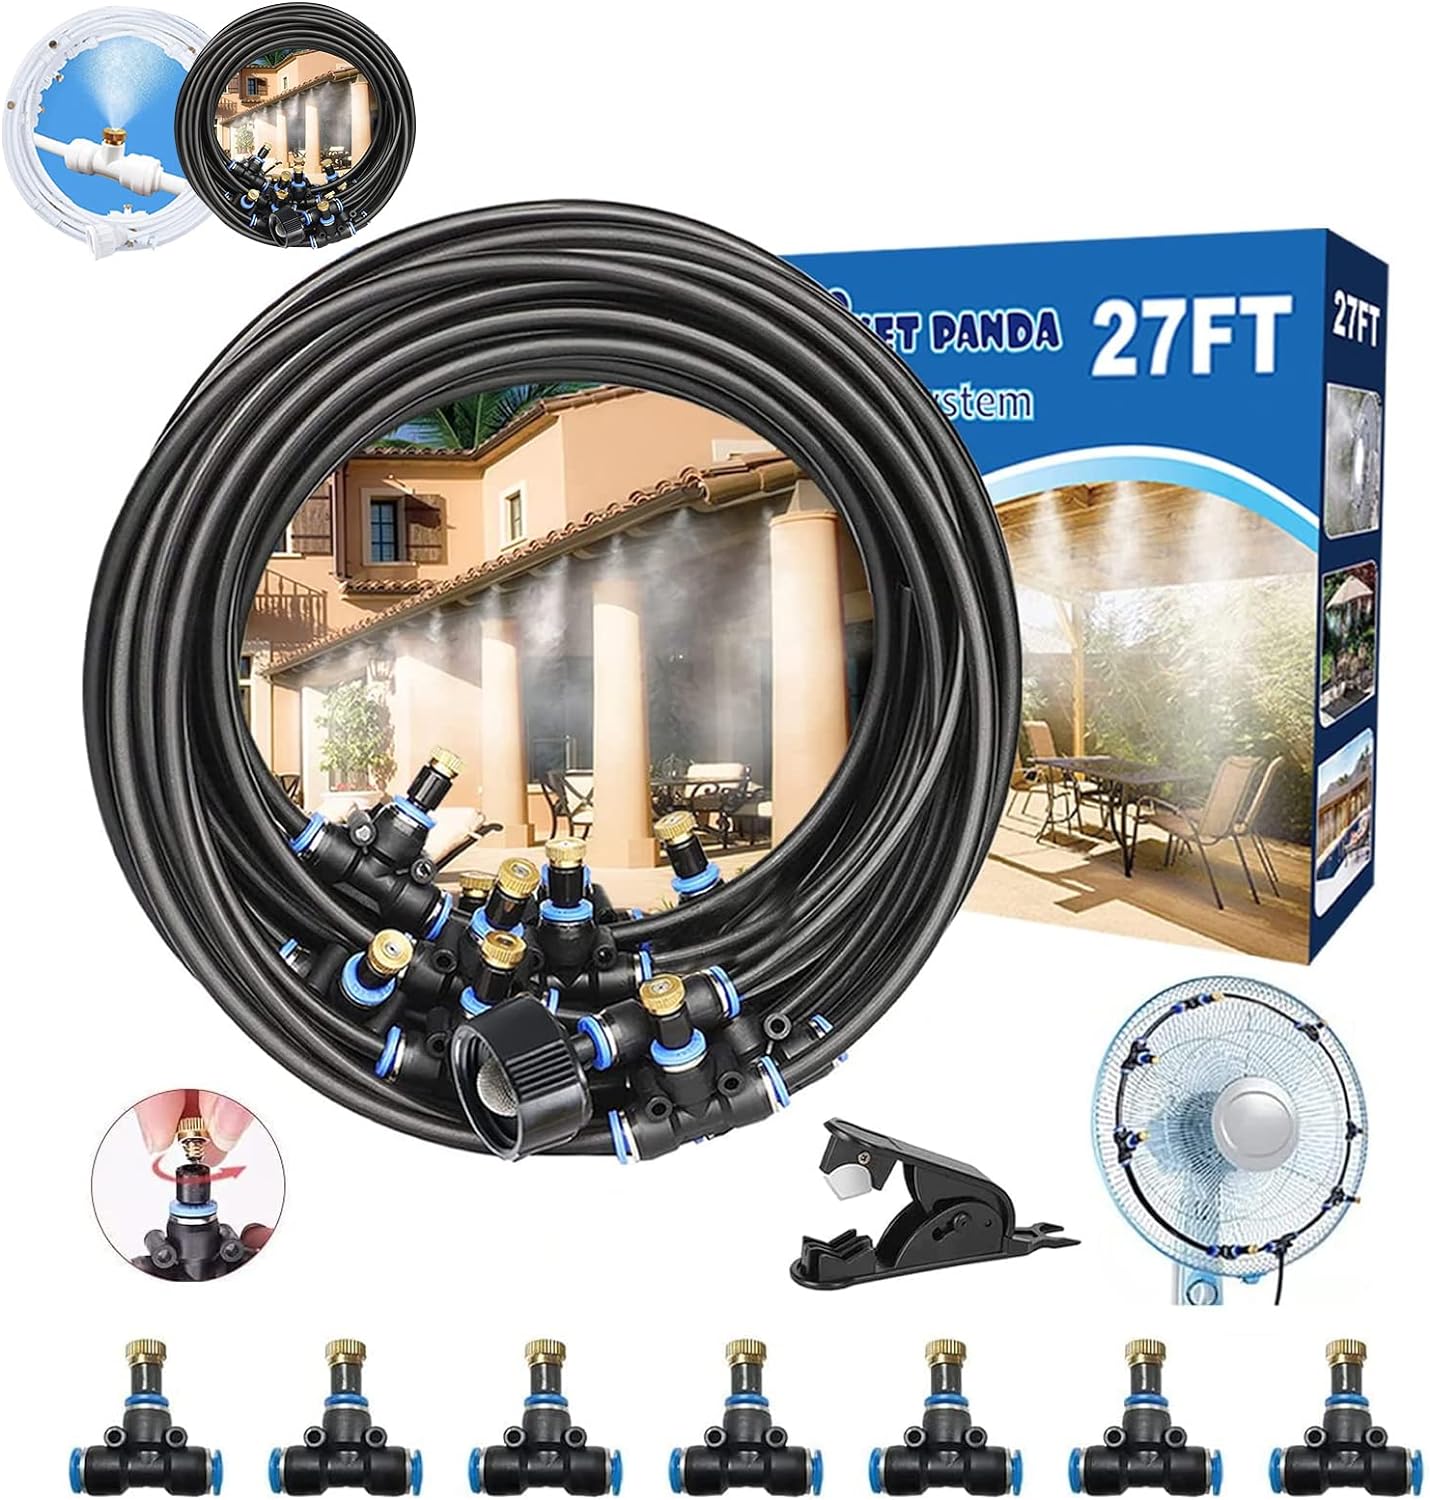 Mister Fan Outdoor for Patio Cooling 35Ft